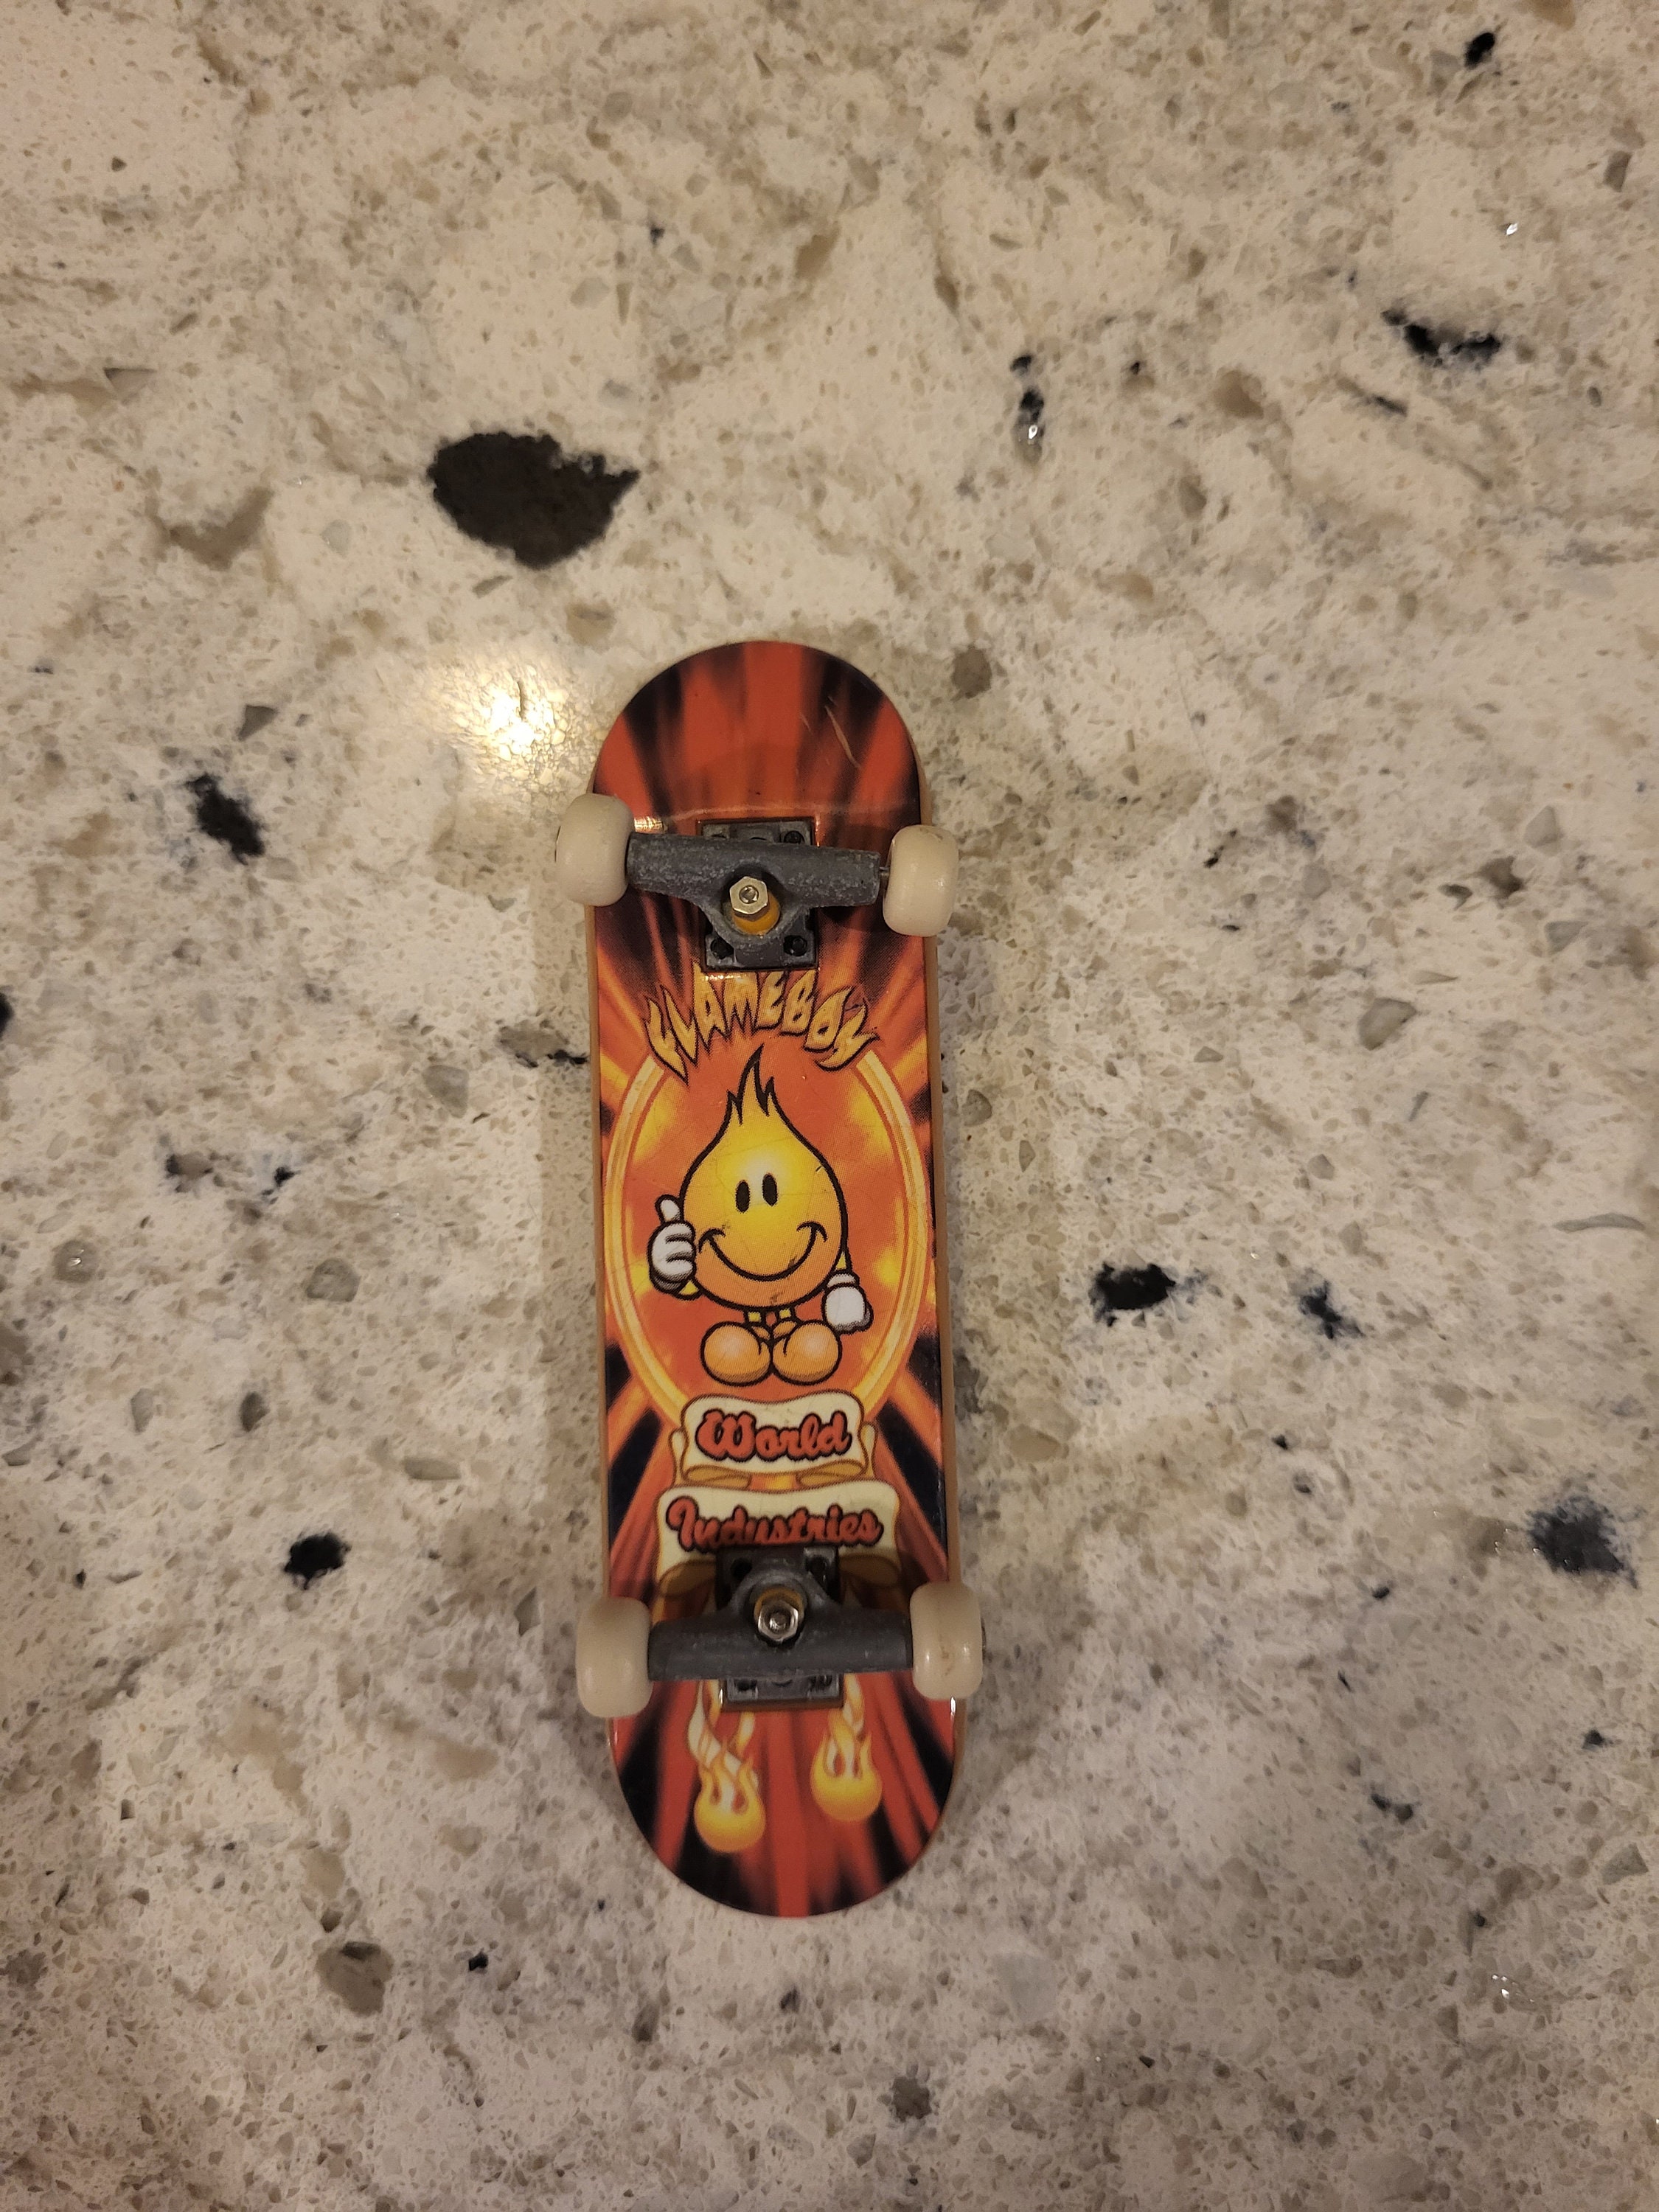 9.5cm Printing Professional Alloy Stand Fingerboard Skateboard